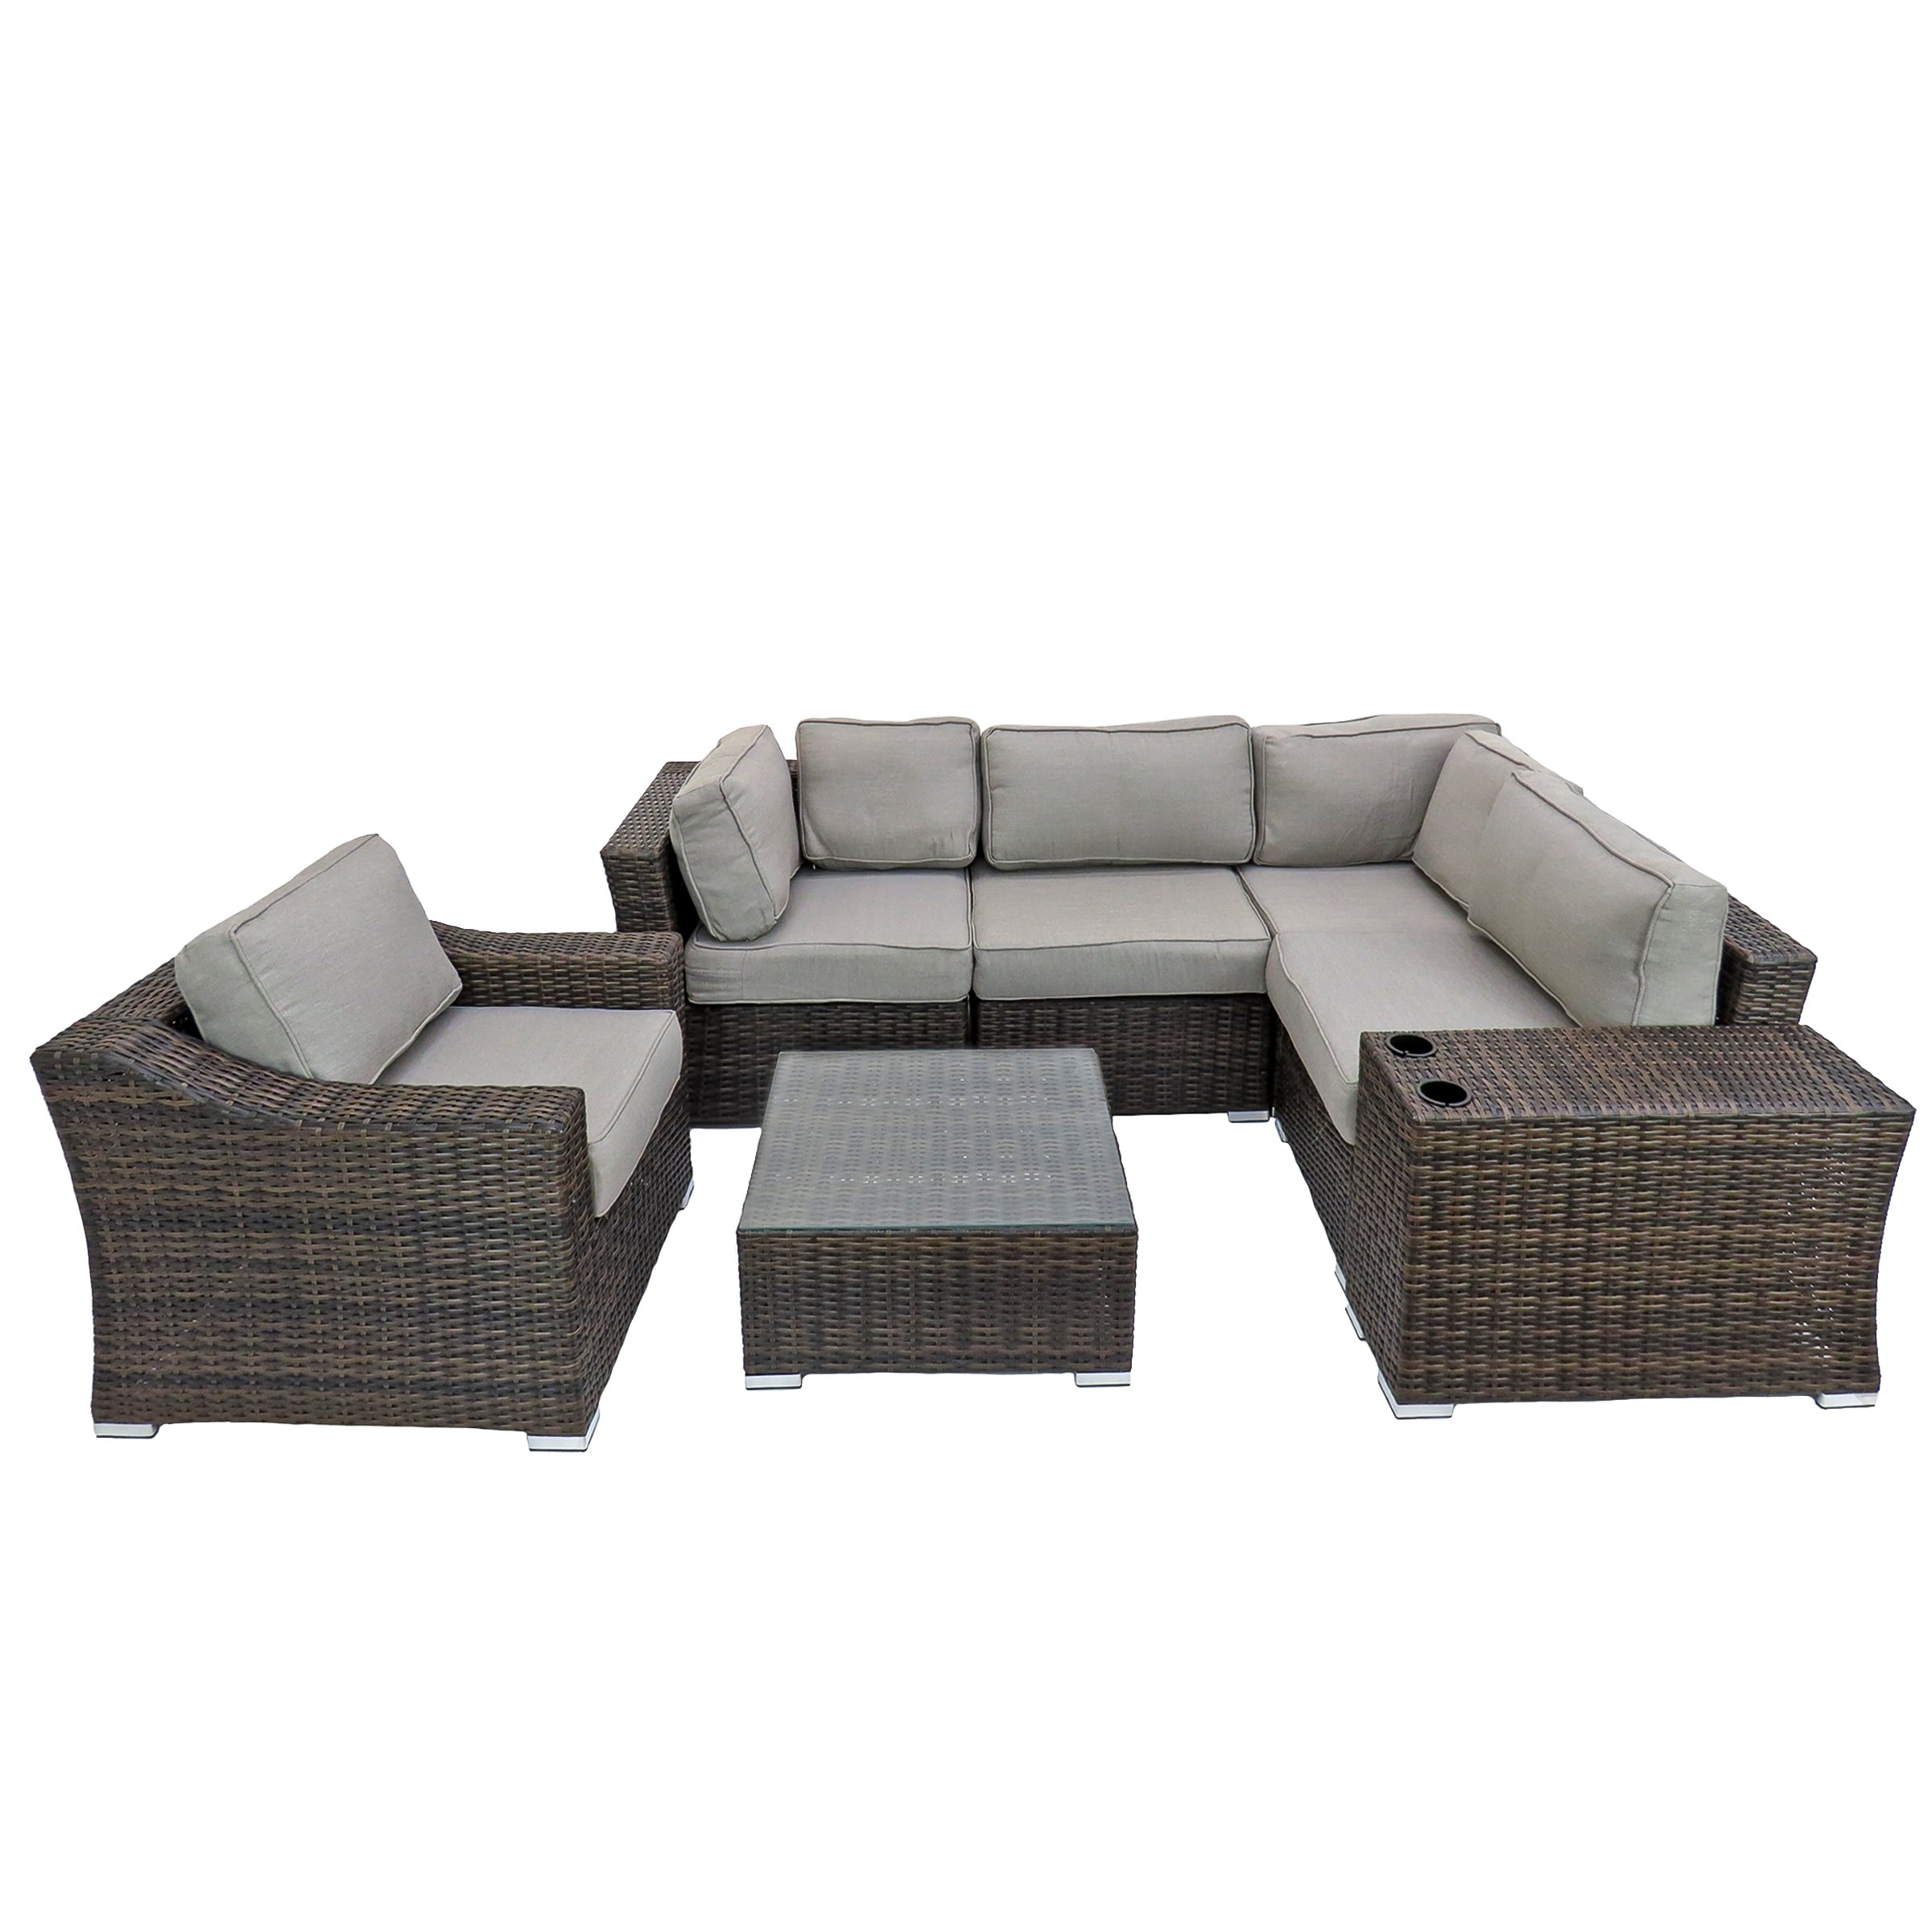 Arlington Collection 7-piece All-weather Sectional Set - 33 Inches